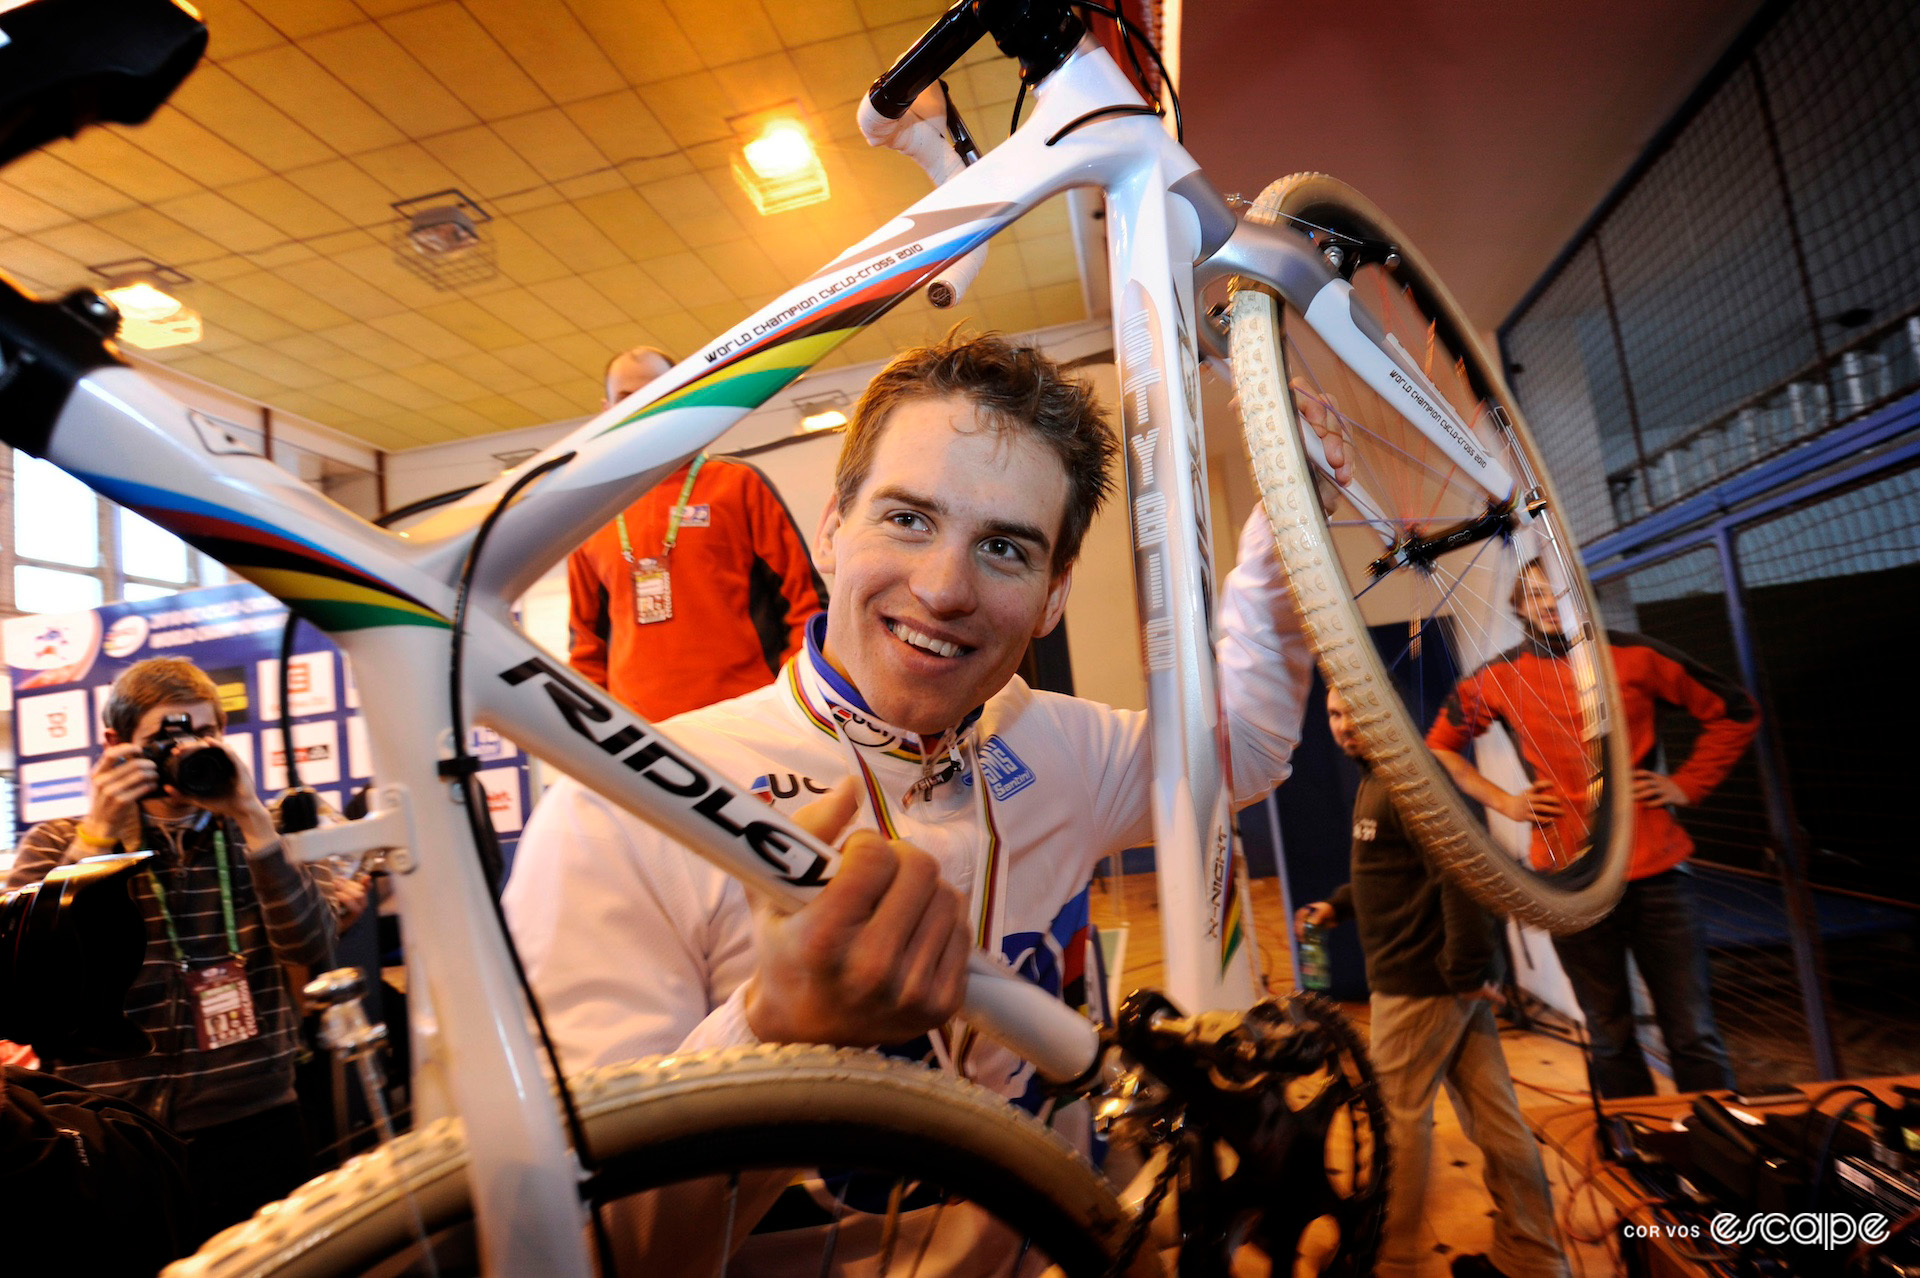 Image of Zdeněk Štybar receiving a special rainbow edition Ridley bike in the winner's press conference at the 2010 Cyclocross World Championships in Tábor.